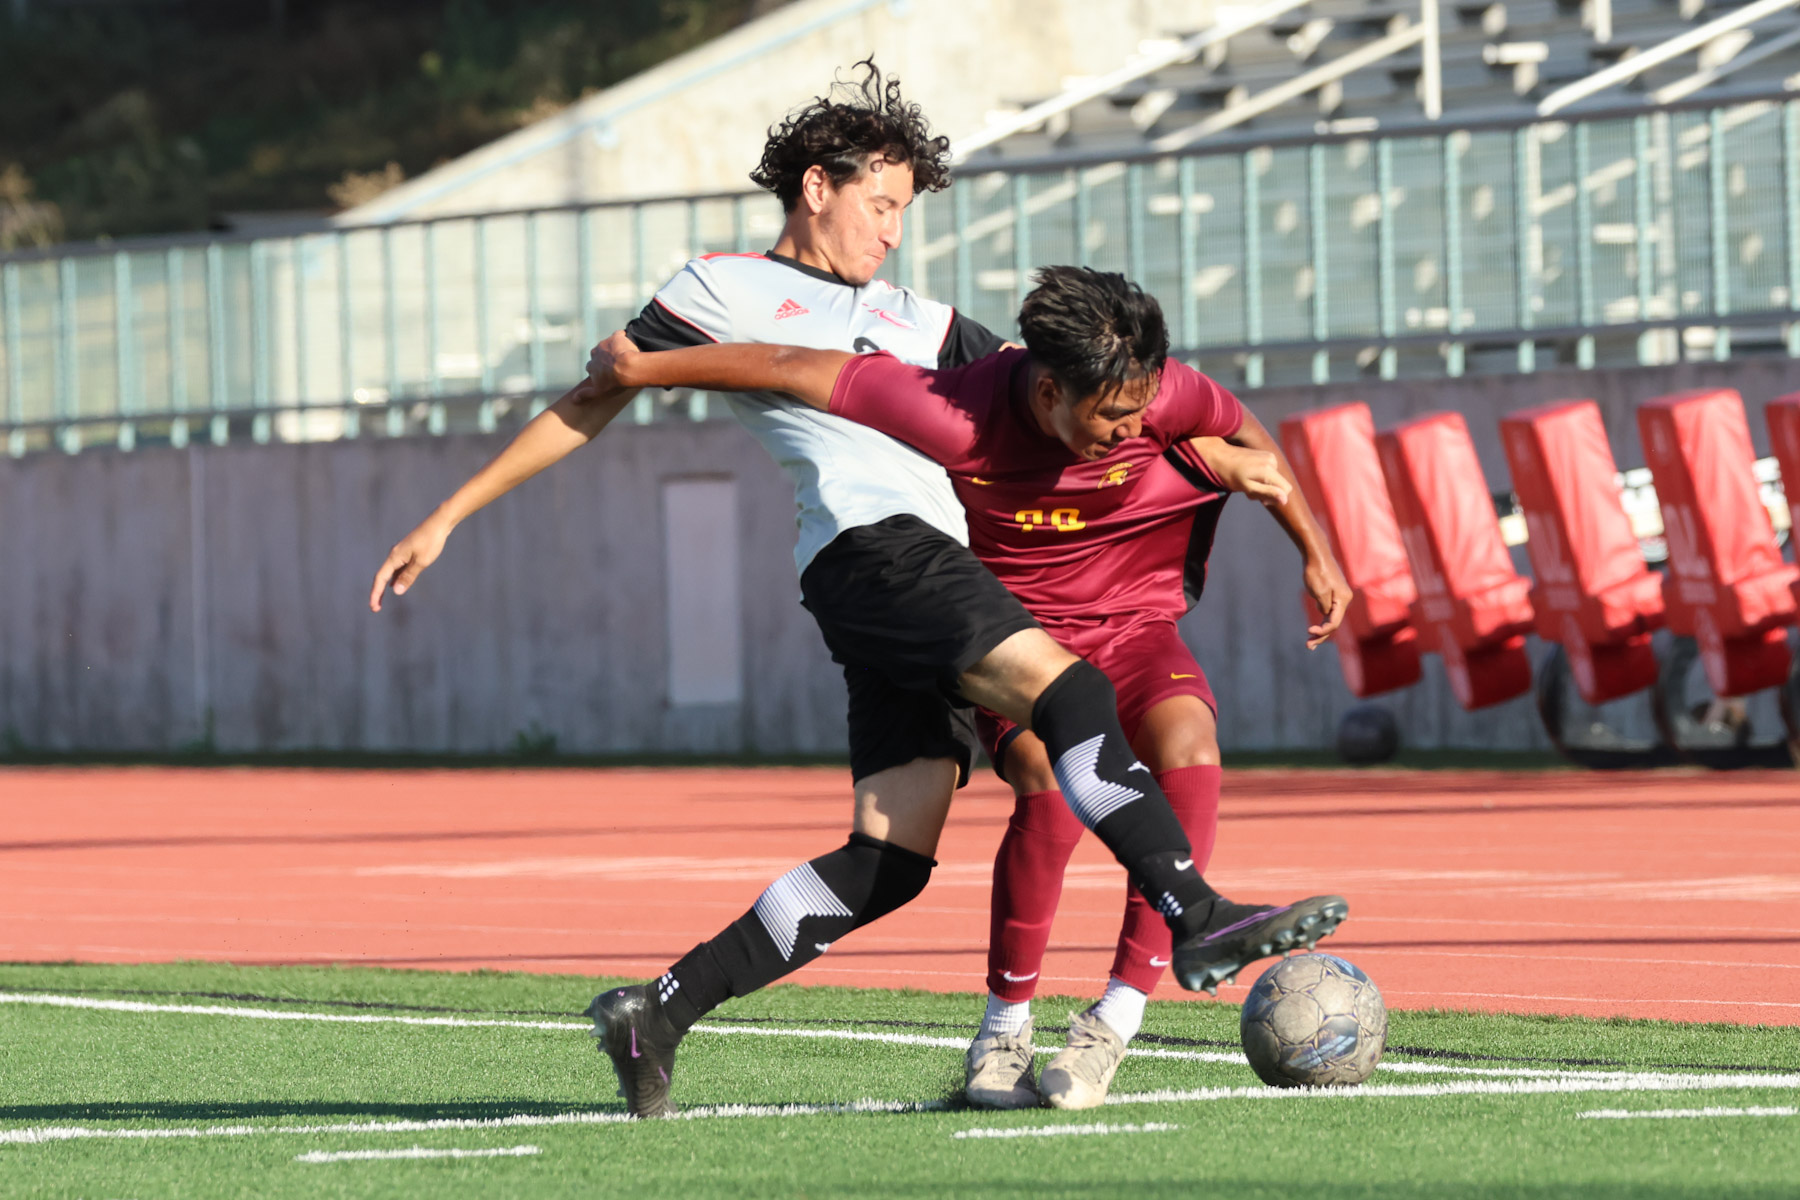 PCC's Miguel Medina fights for the ball v. a Compton player in Friday's  victory (photo by Richard Quinton).